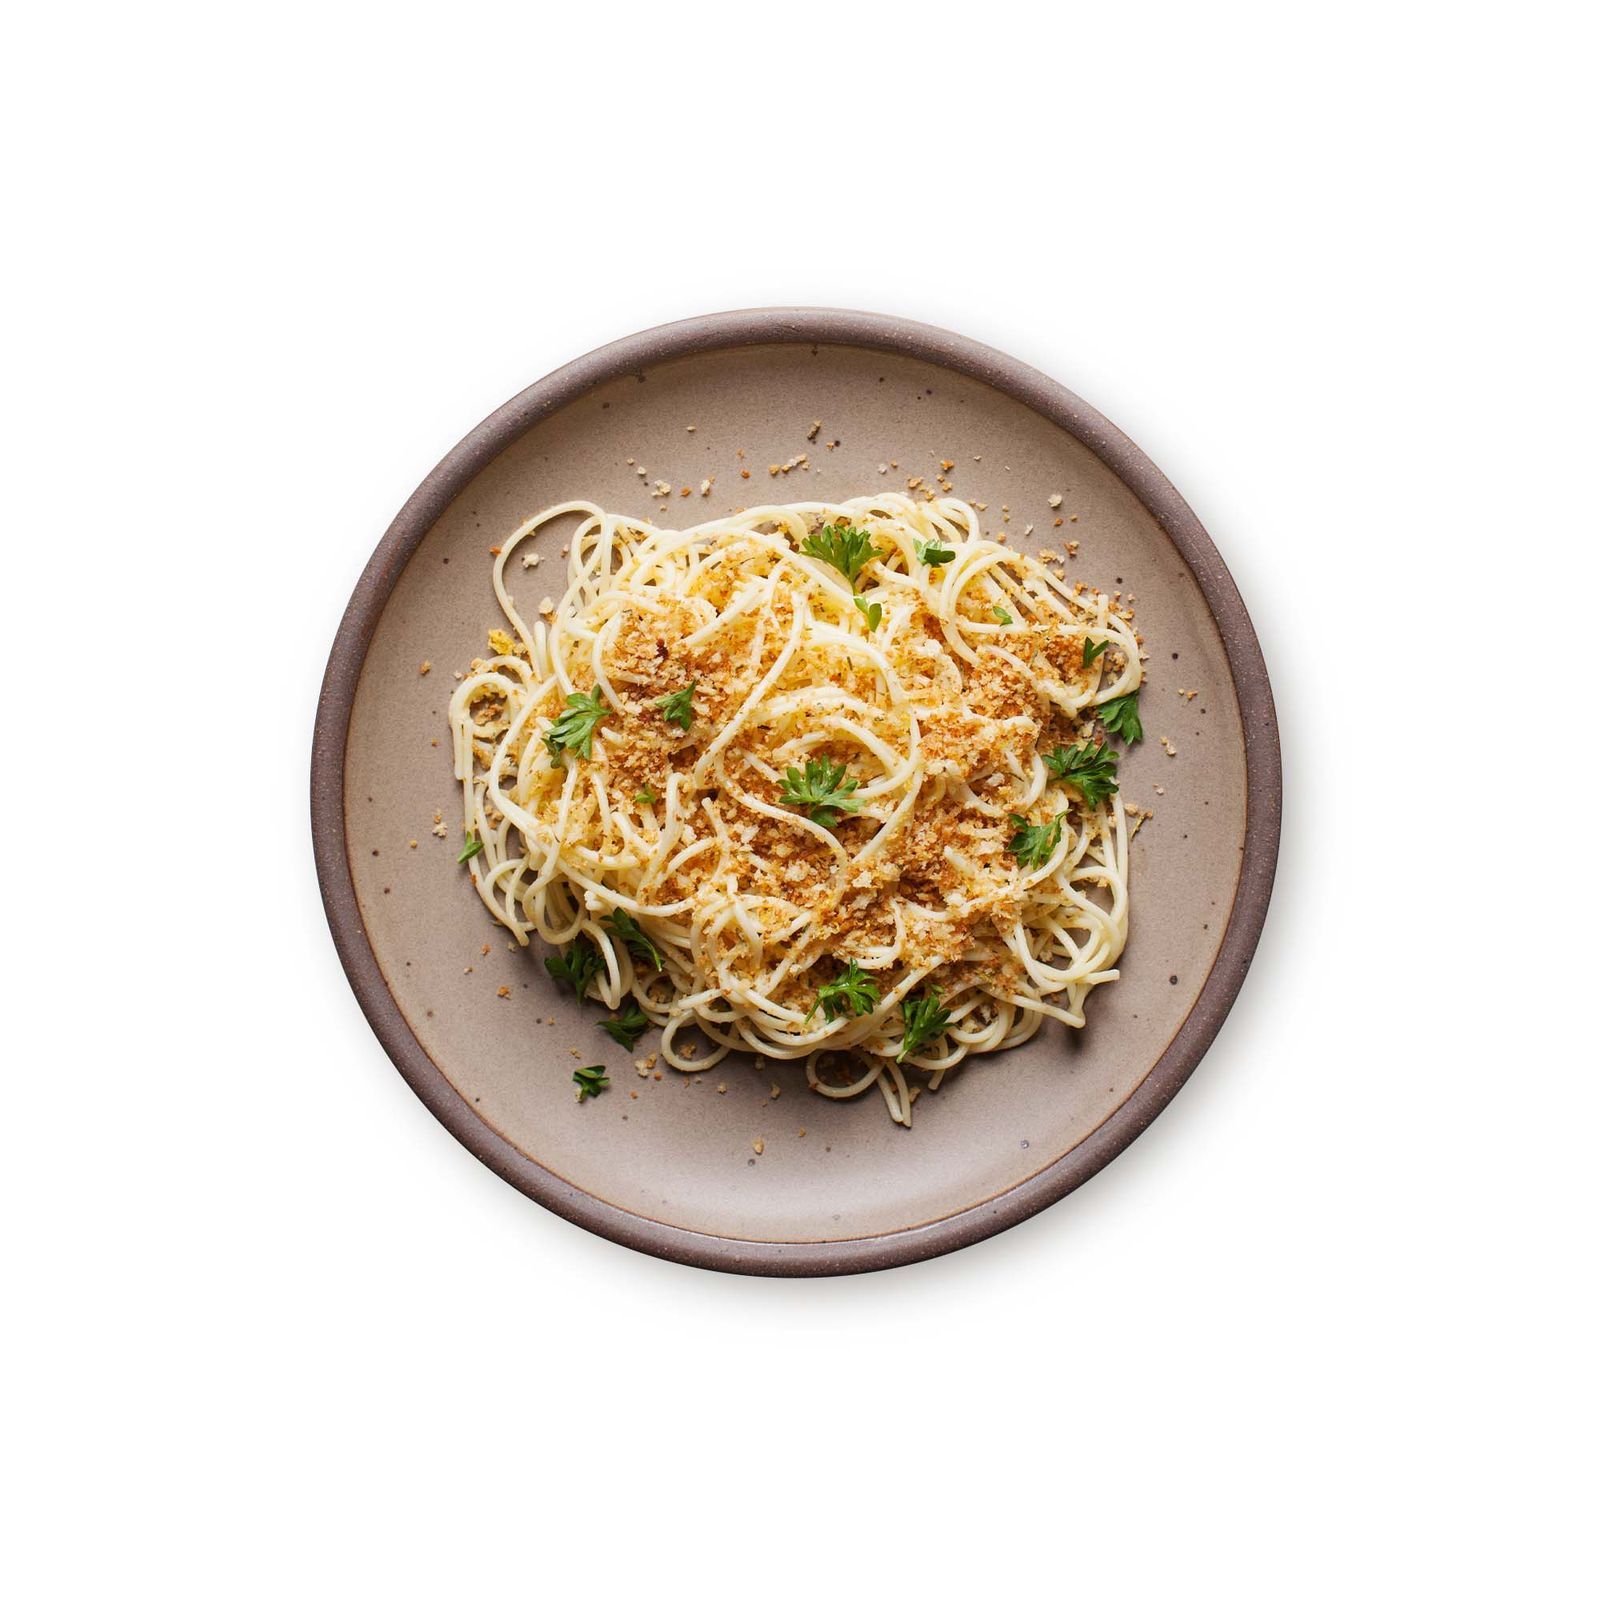 A dinner plate with a heaping serving of spaghetti with parsley and breadcrumbs sprinkled on top